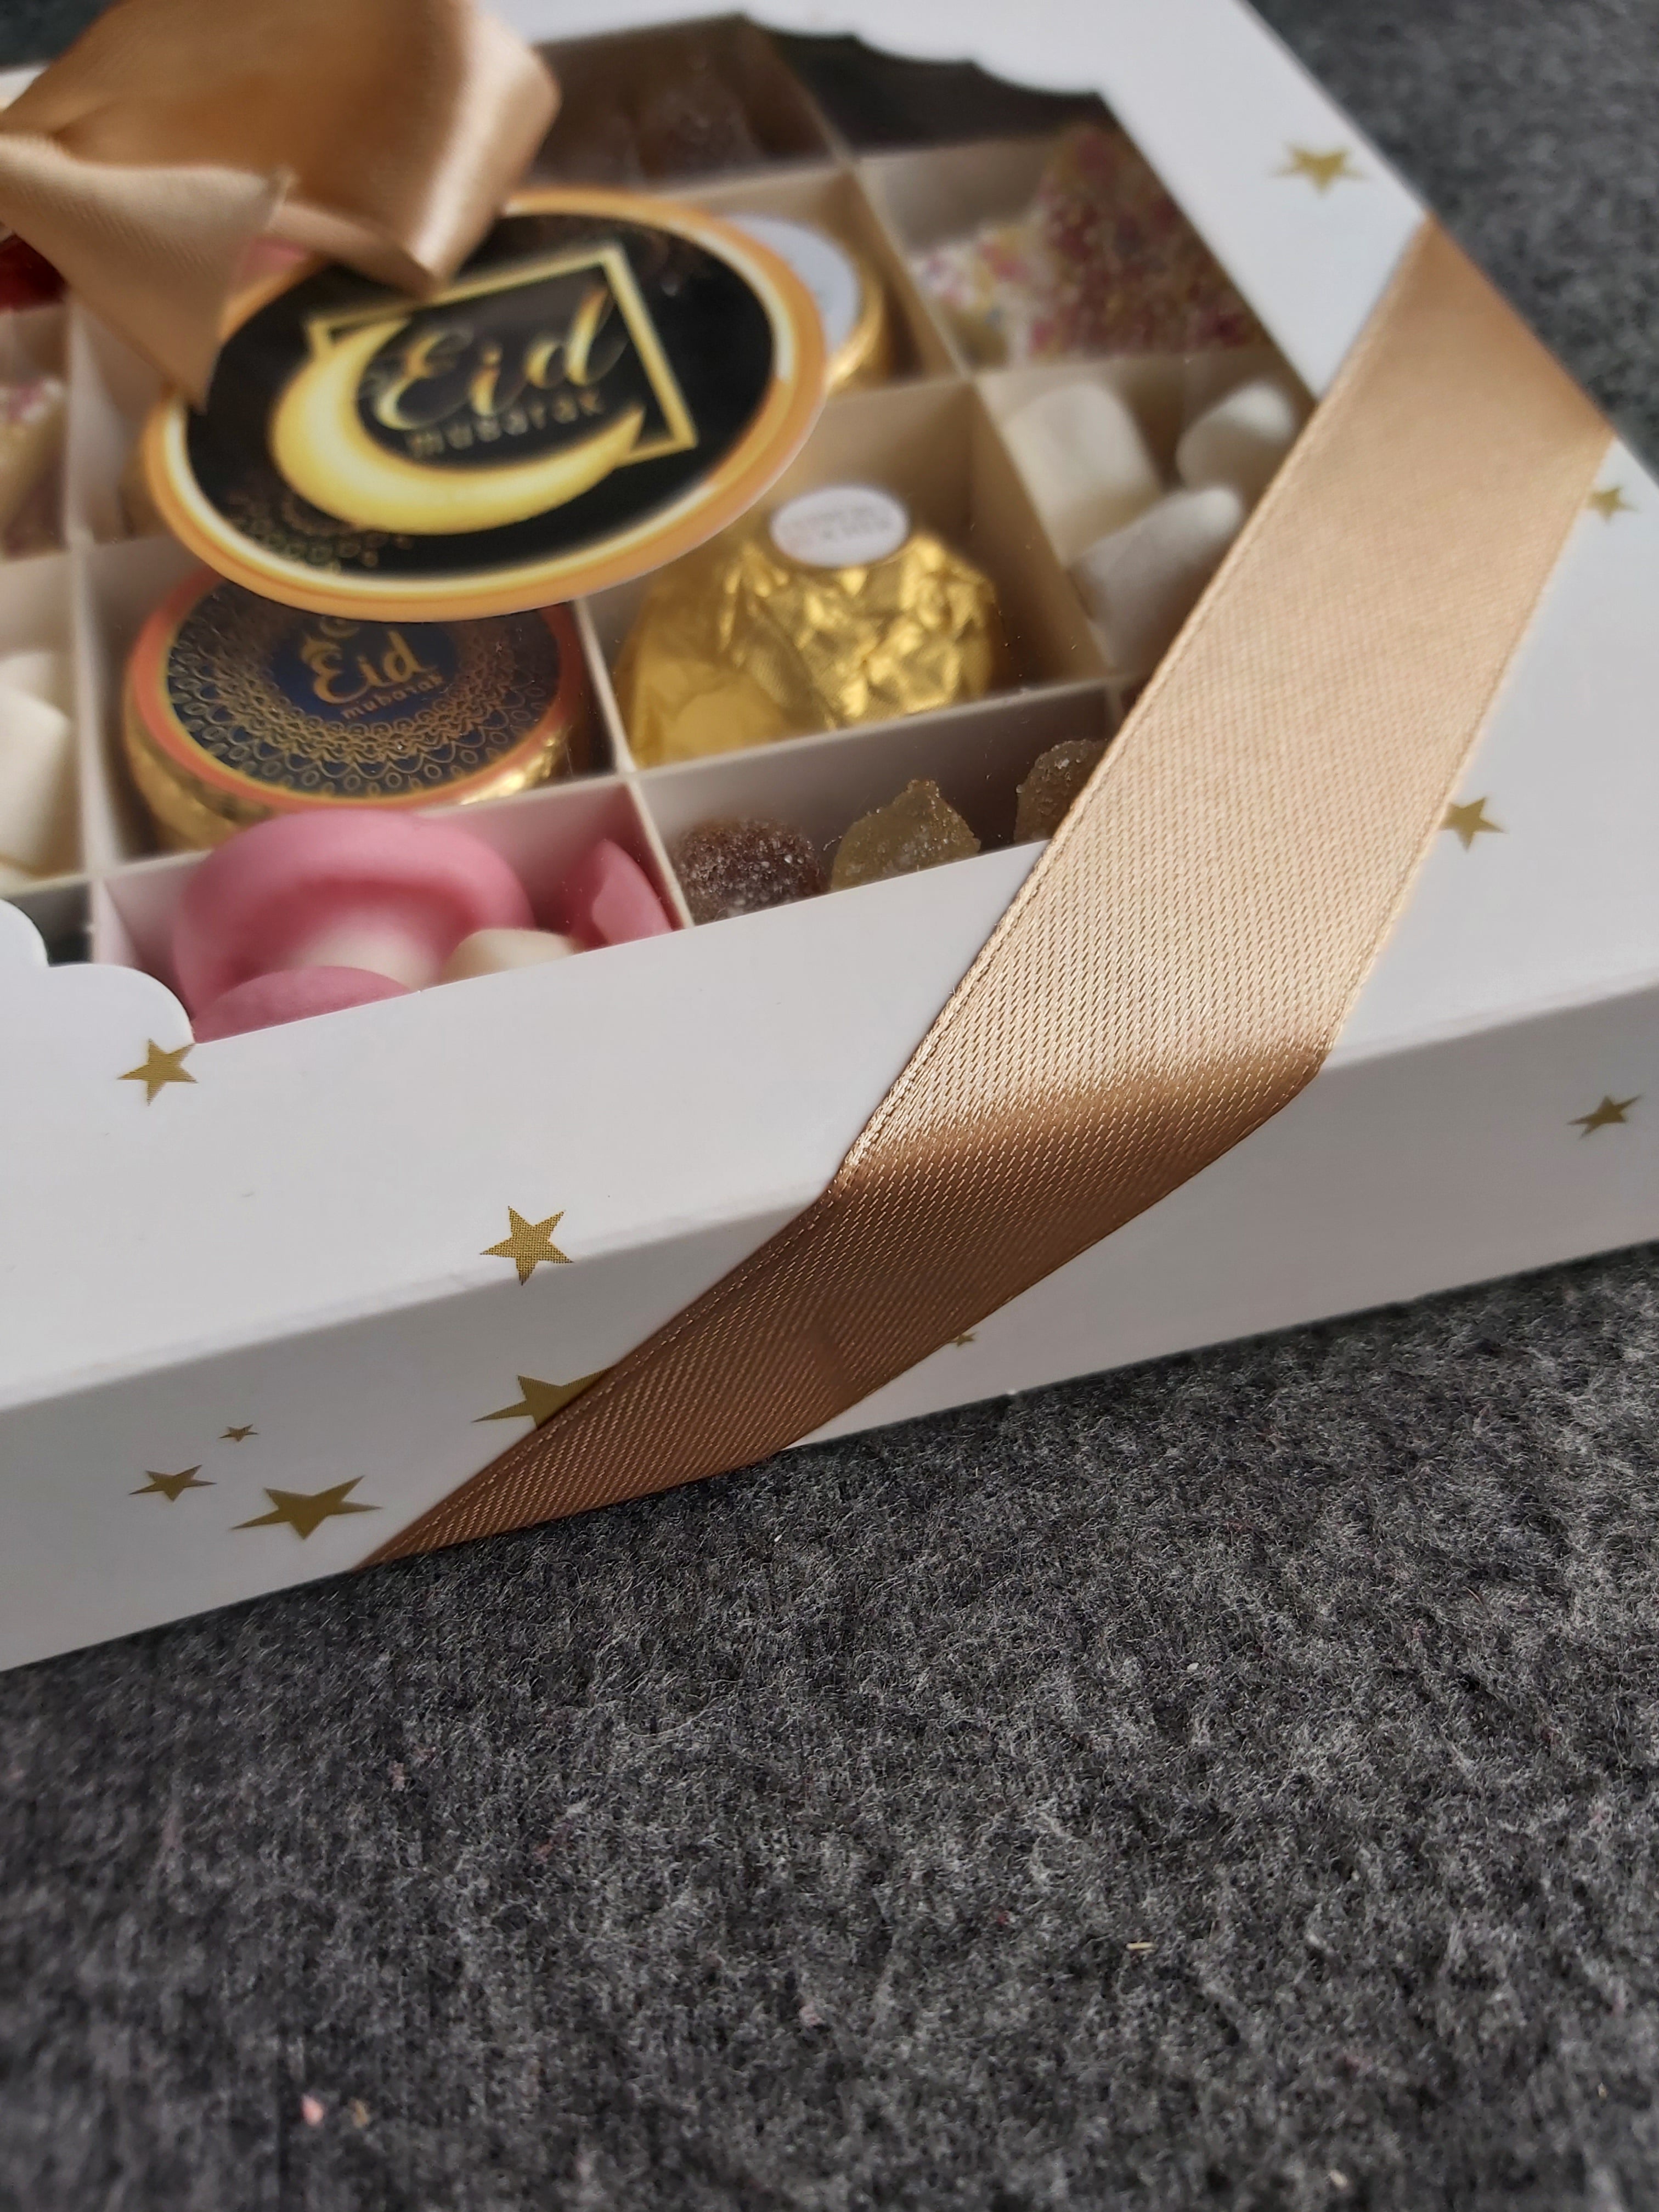 COLLECTION ONLY: #1 Eid Mubarak Sweets & Chocolate Selection Box